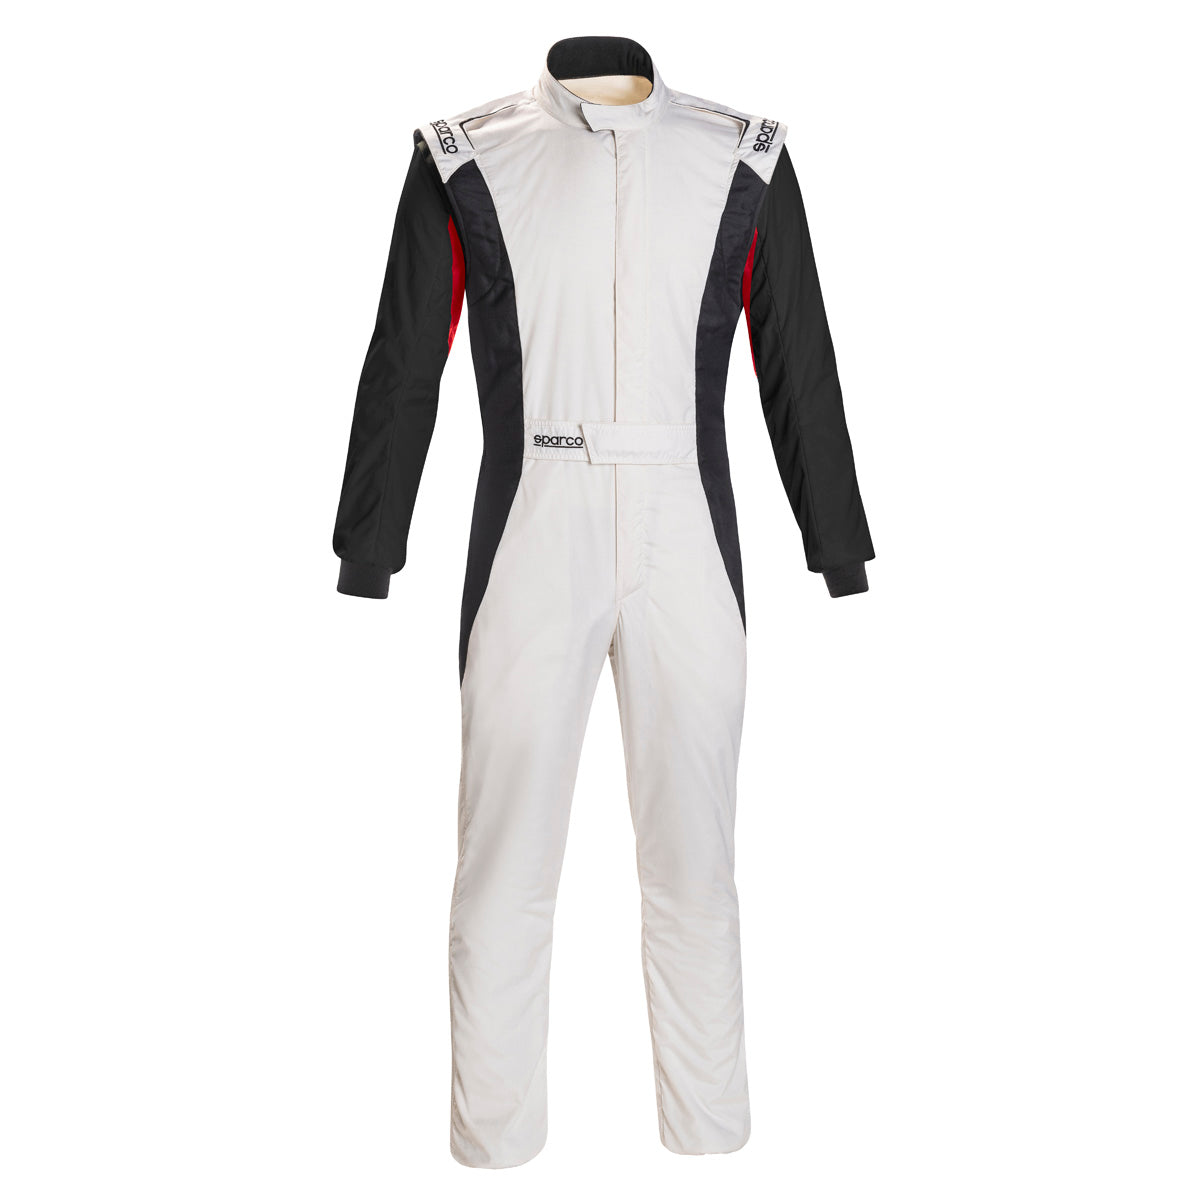 Sparco Competition US Racing Suit - Boot Cut